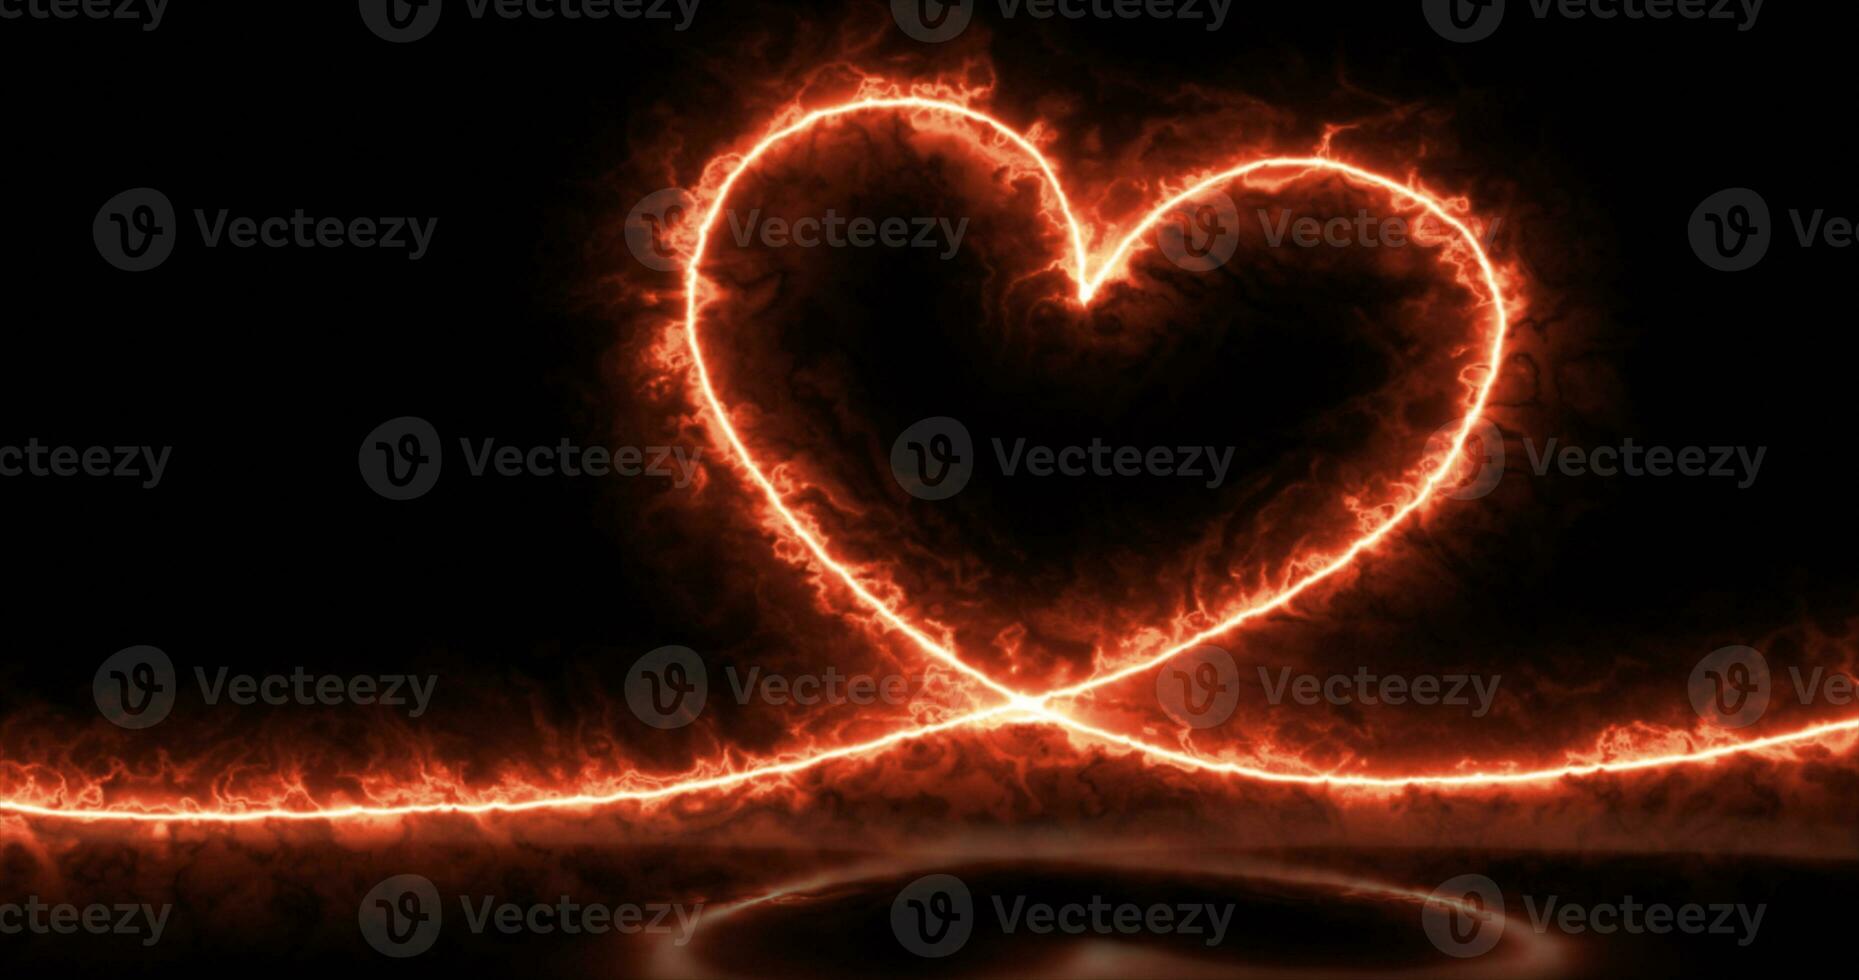 Abstract bright orange fiery energy light love heart with reflections and fire abstract background photo